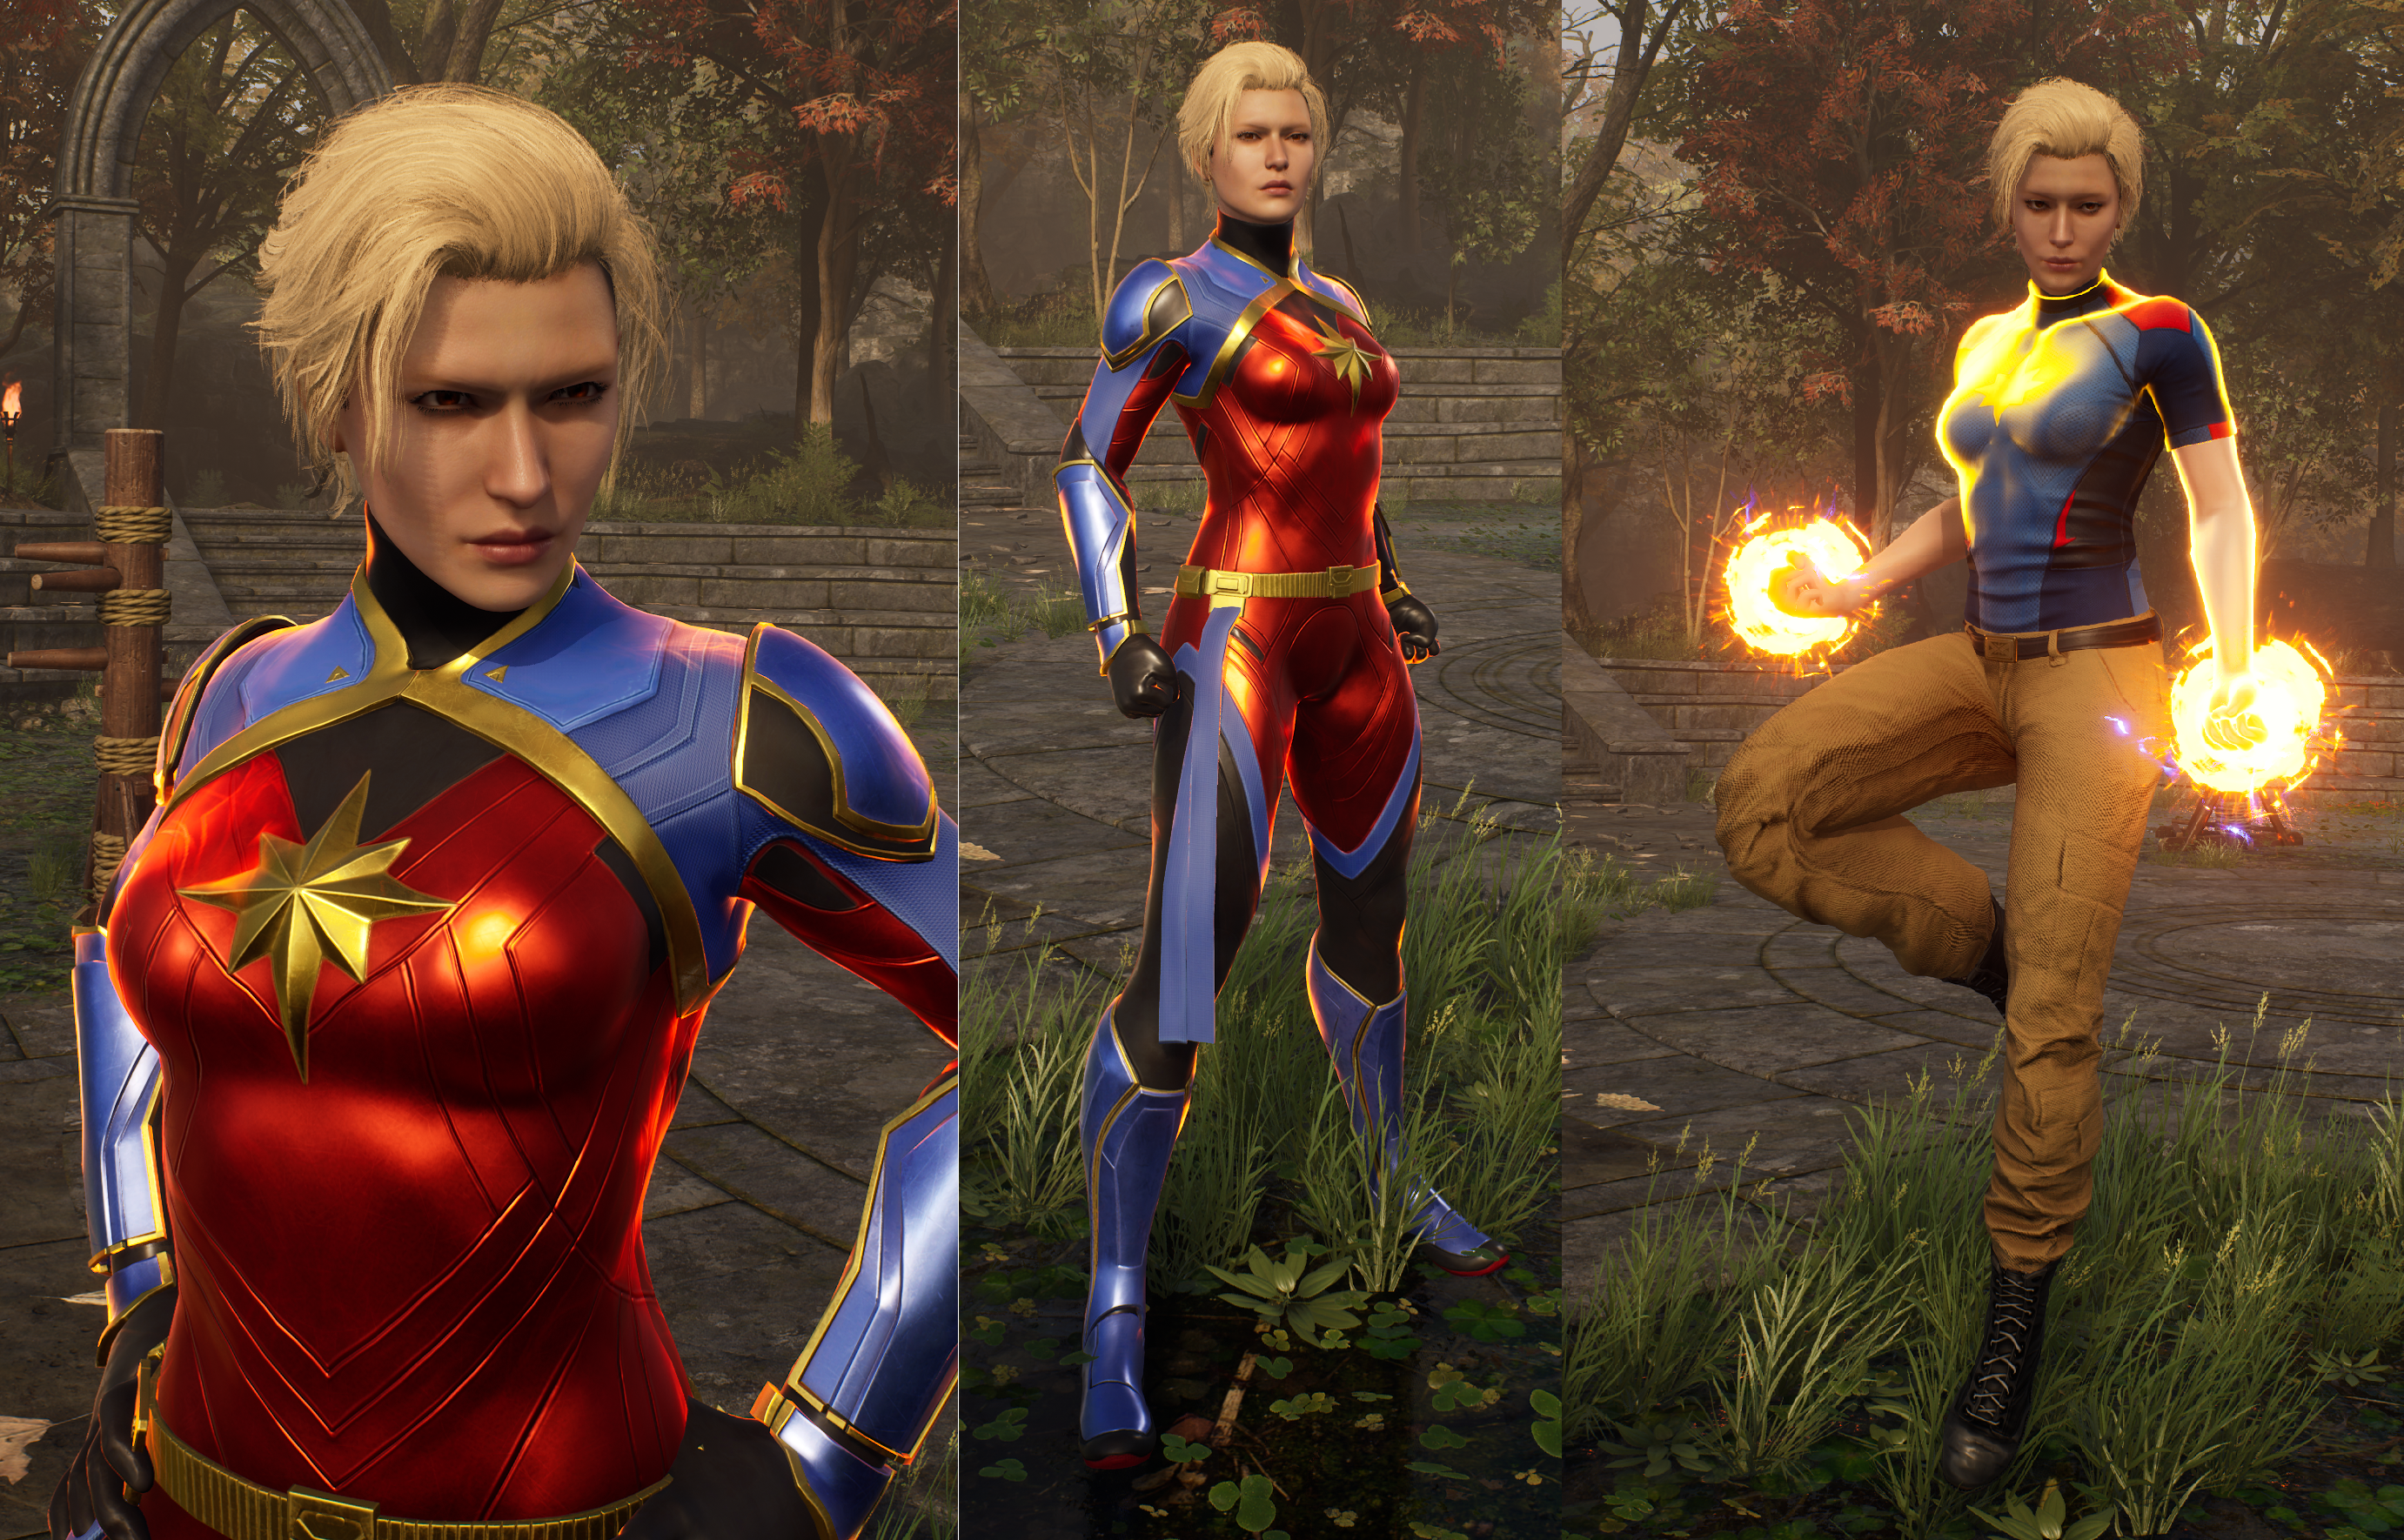 How Firaxis made Marvel and XCOM mesh for Midnight Suns